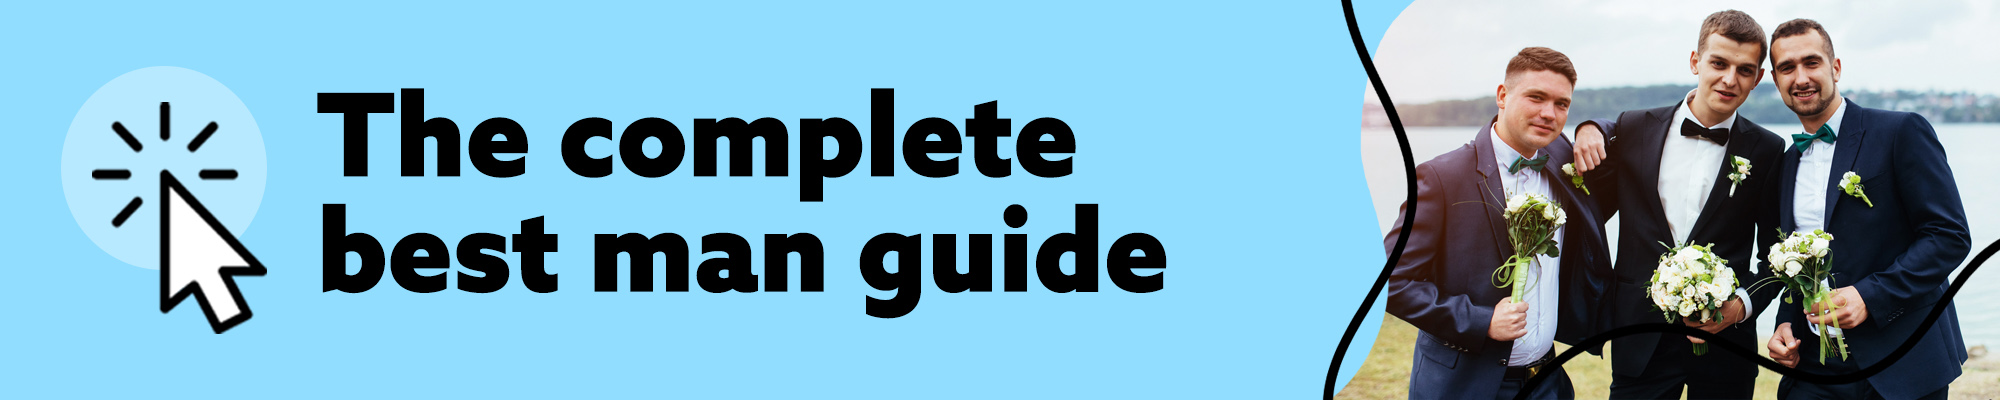 The Complete Best Man Guide